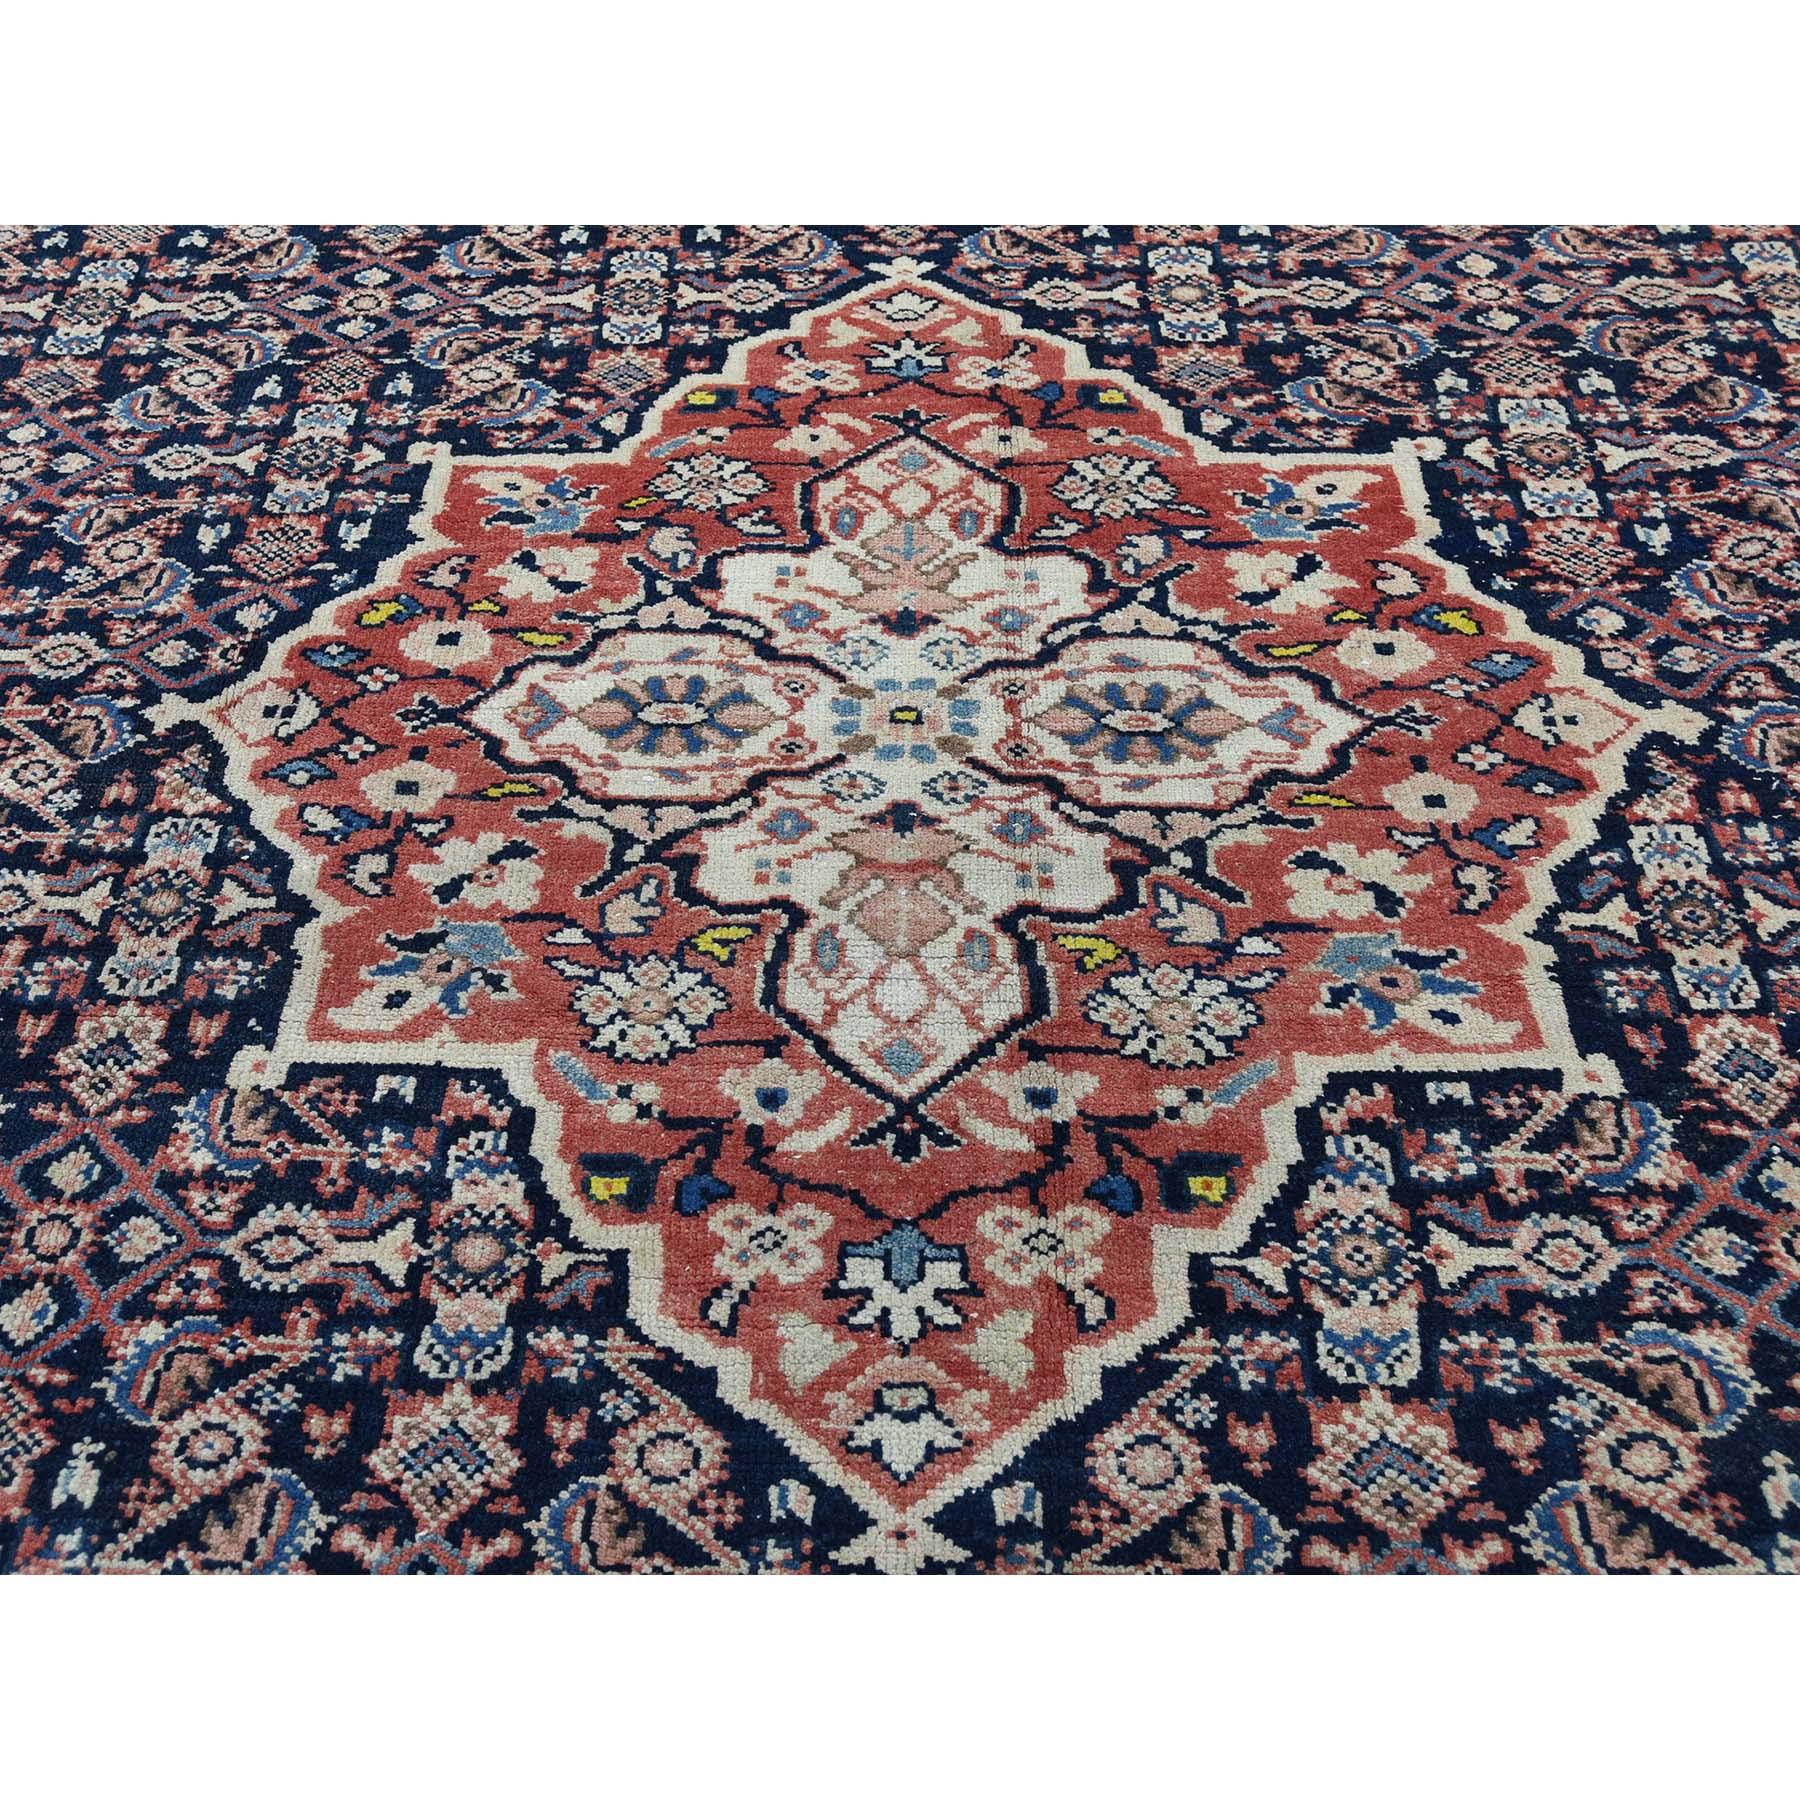 Antique Persian Mahal Even Wear Navy Blue Hand-Knotted Oriental Rug 3